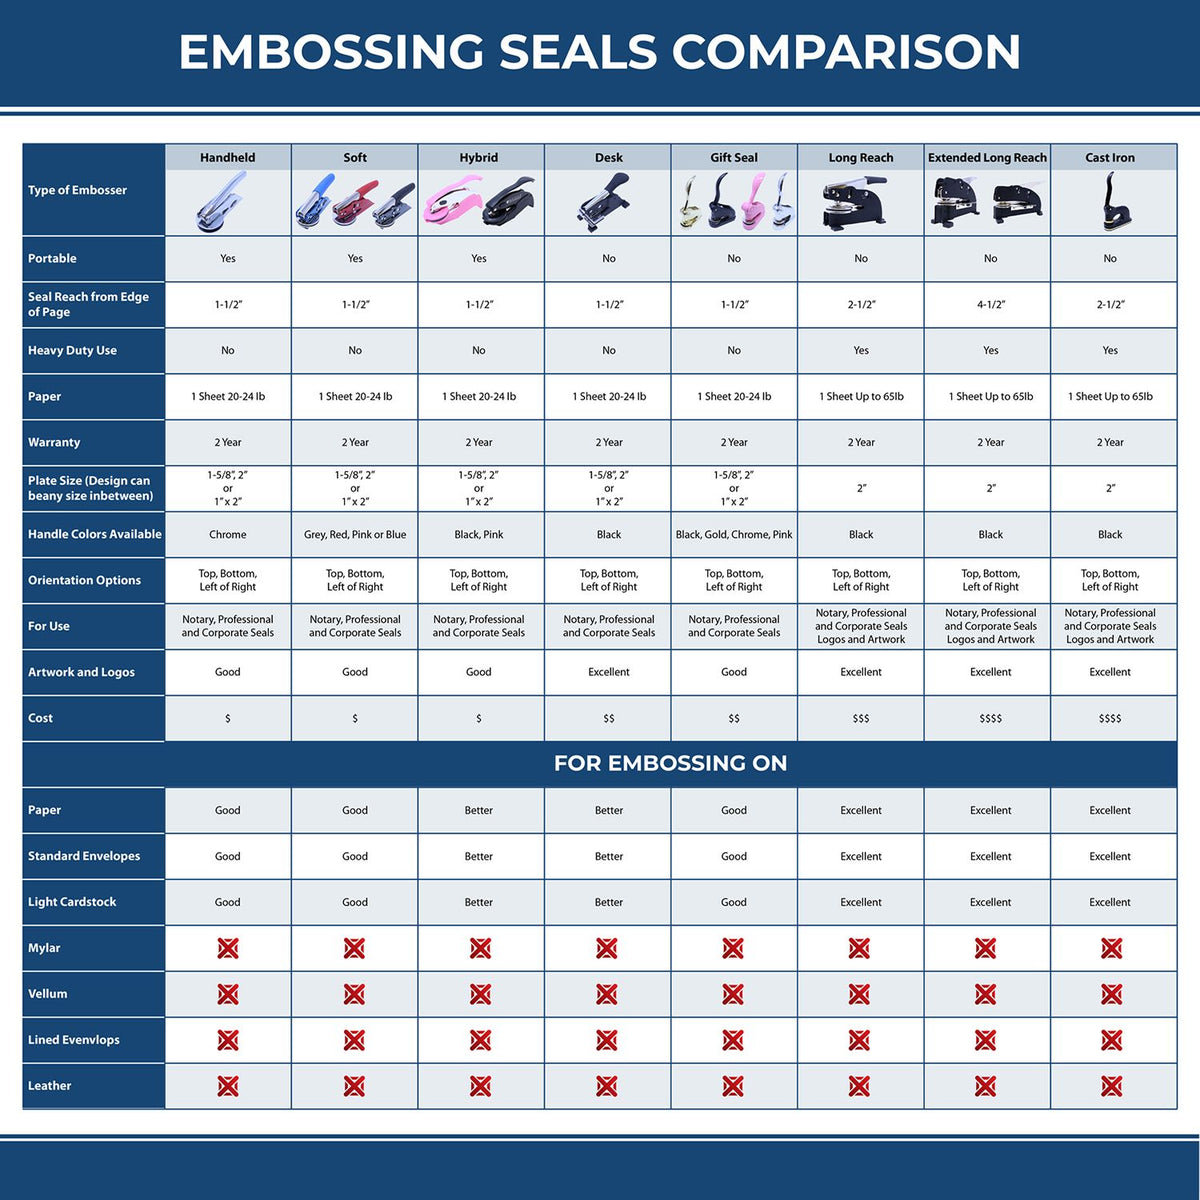 A comparison chart for the different types of mount models available for the State of Texas Long Reach Architectural Embossing Seal.